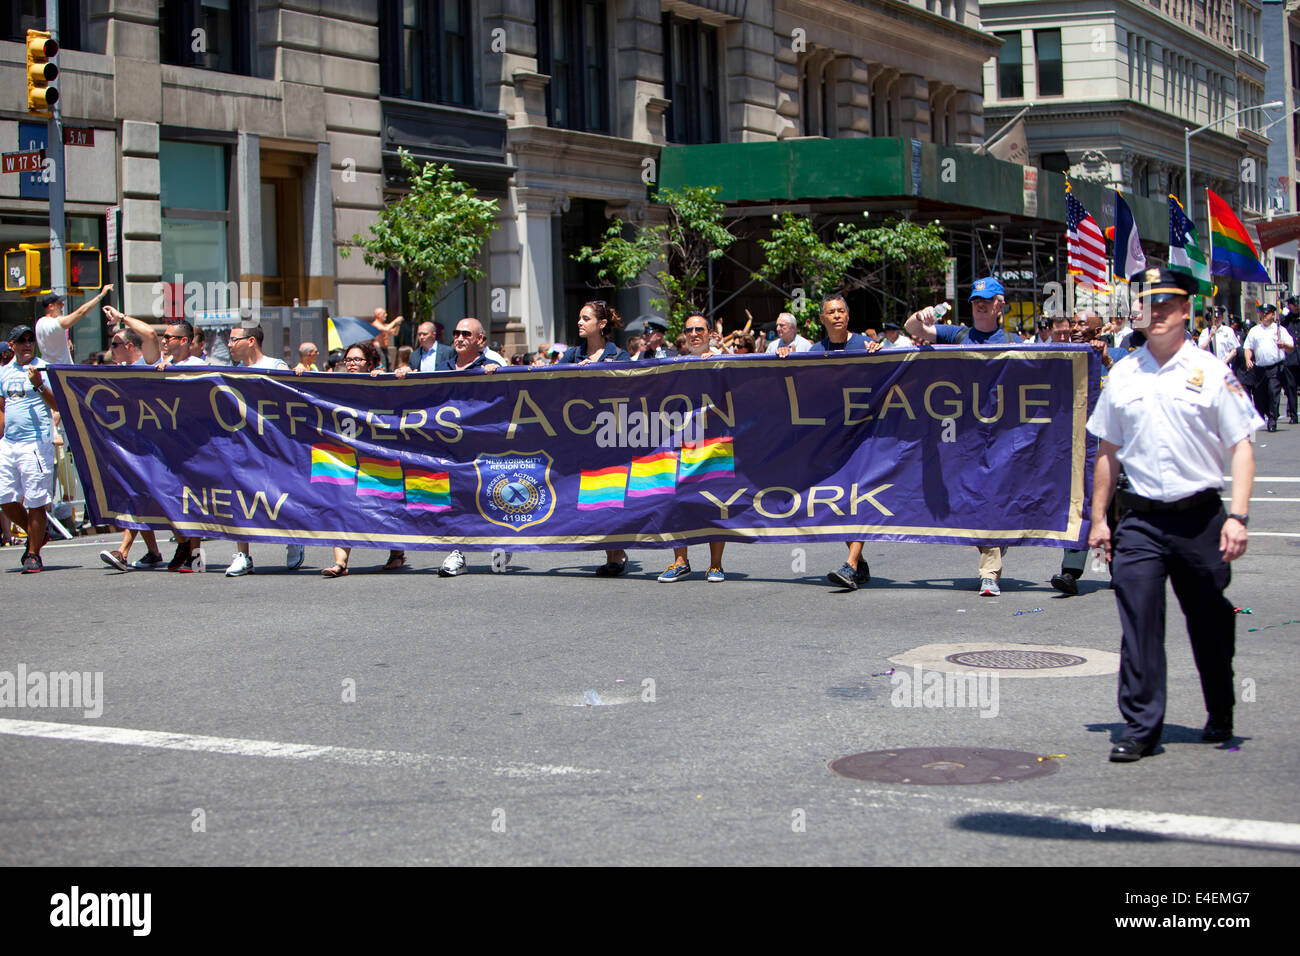 NEW YORK, USA - JUNE 29th 2014: The New York City Pride March commemorating the gay rights movement. Stock Photo